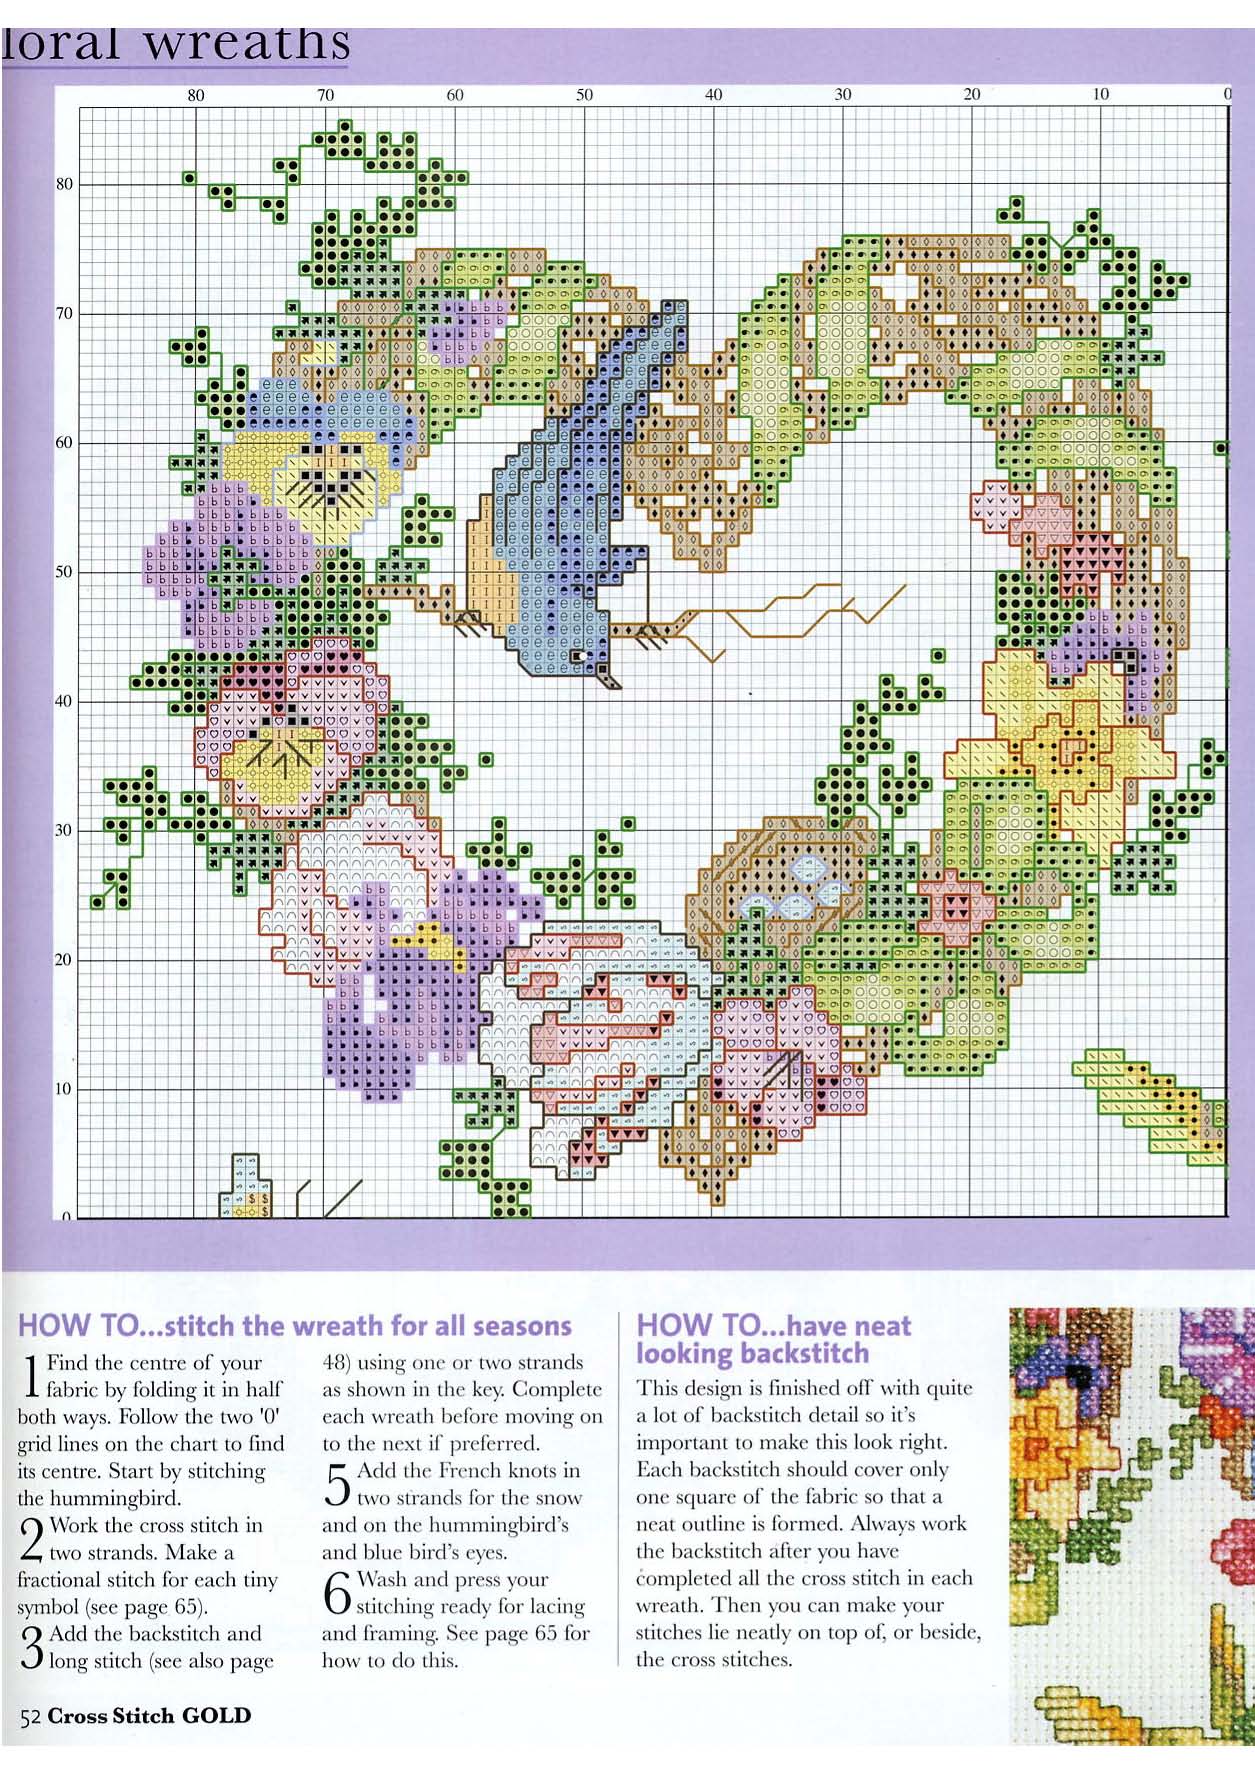 Floral garlands of four seasons cross stitch pattern (2)